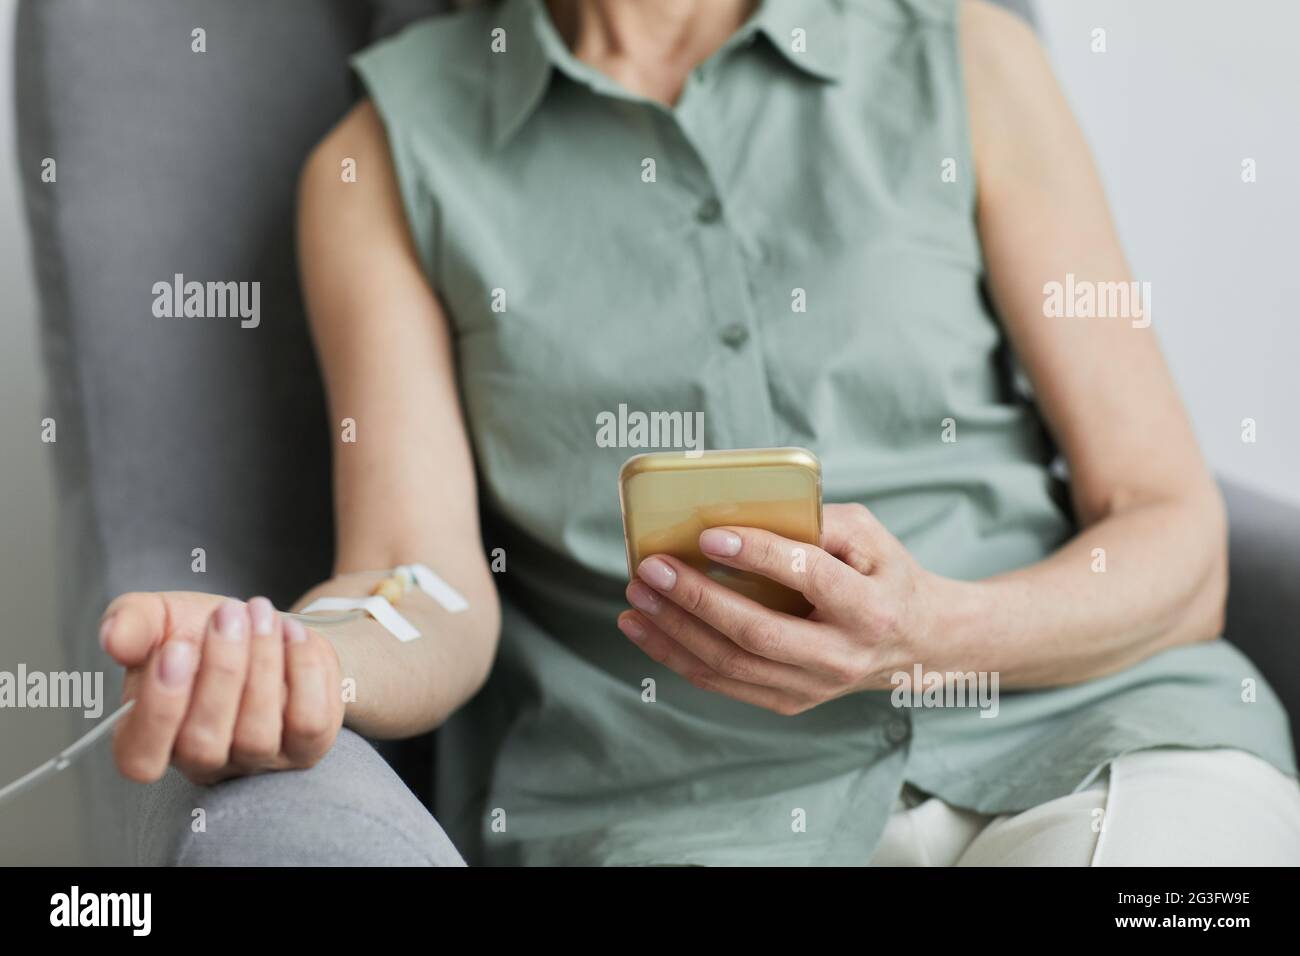 Minimal close up of unrecognizable woman getting IV drip and using smartphone, copy space Stock Photo